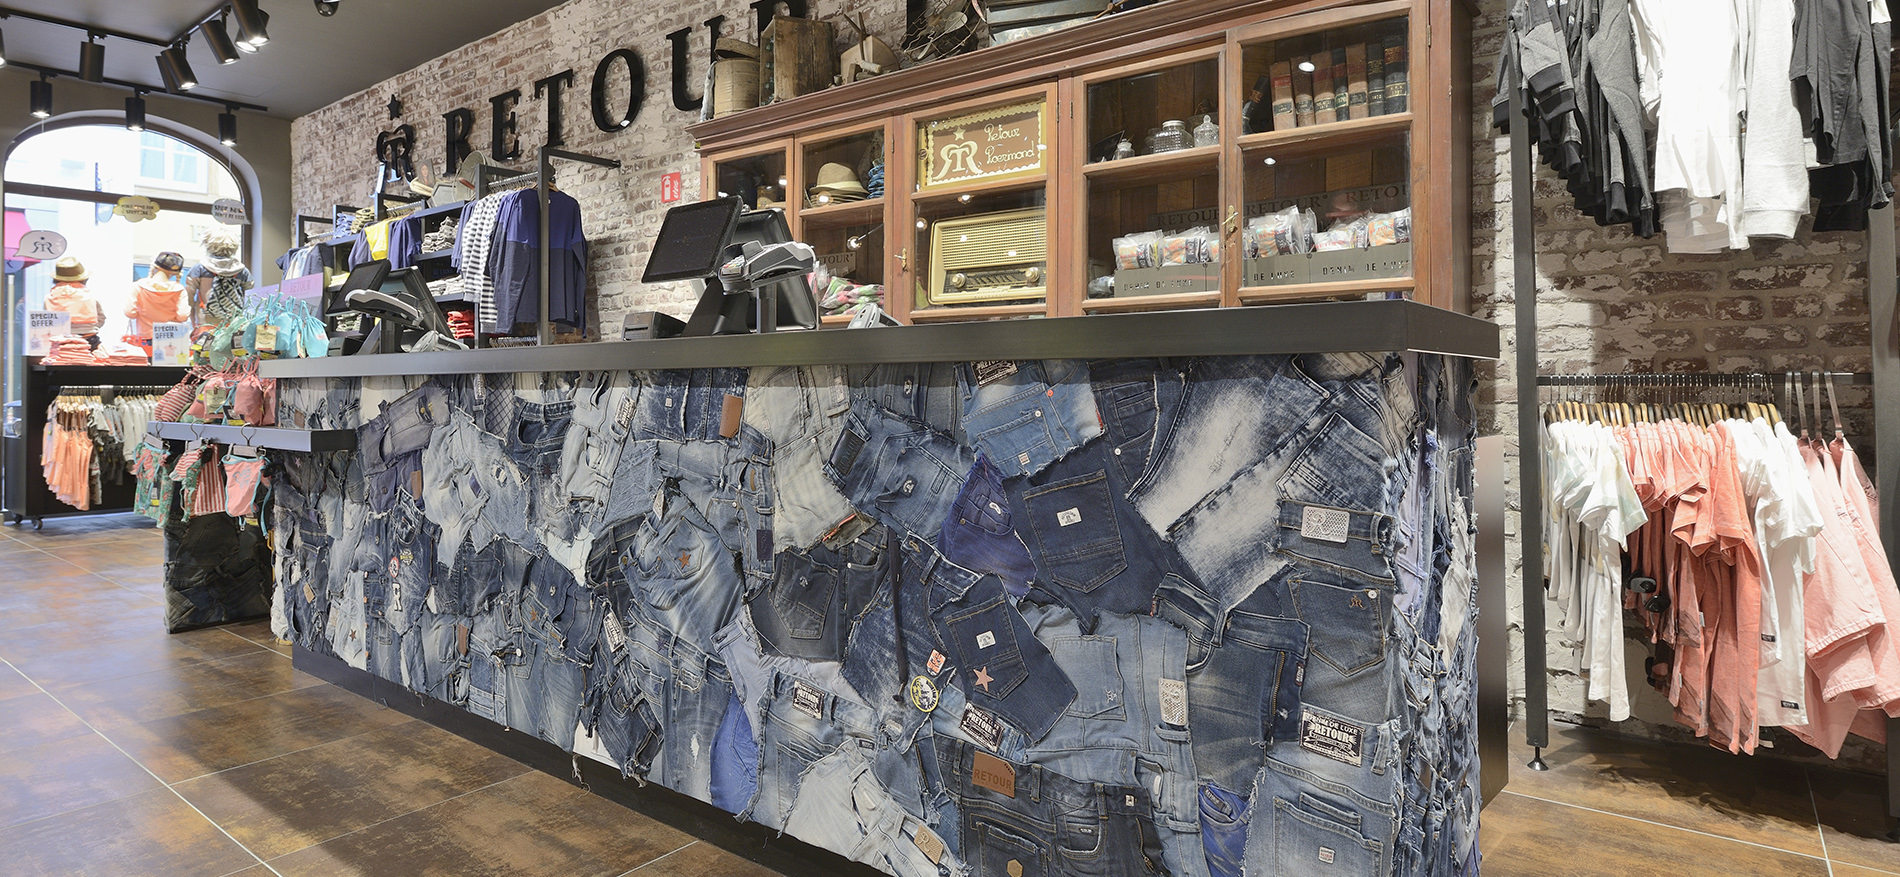 Center Roermond has gained an appealing store concept